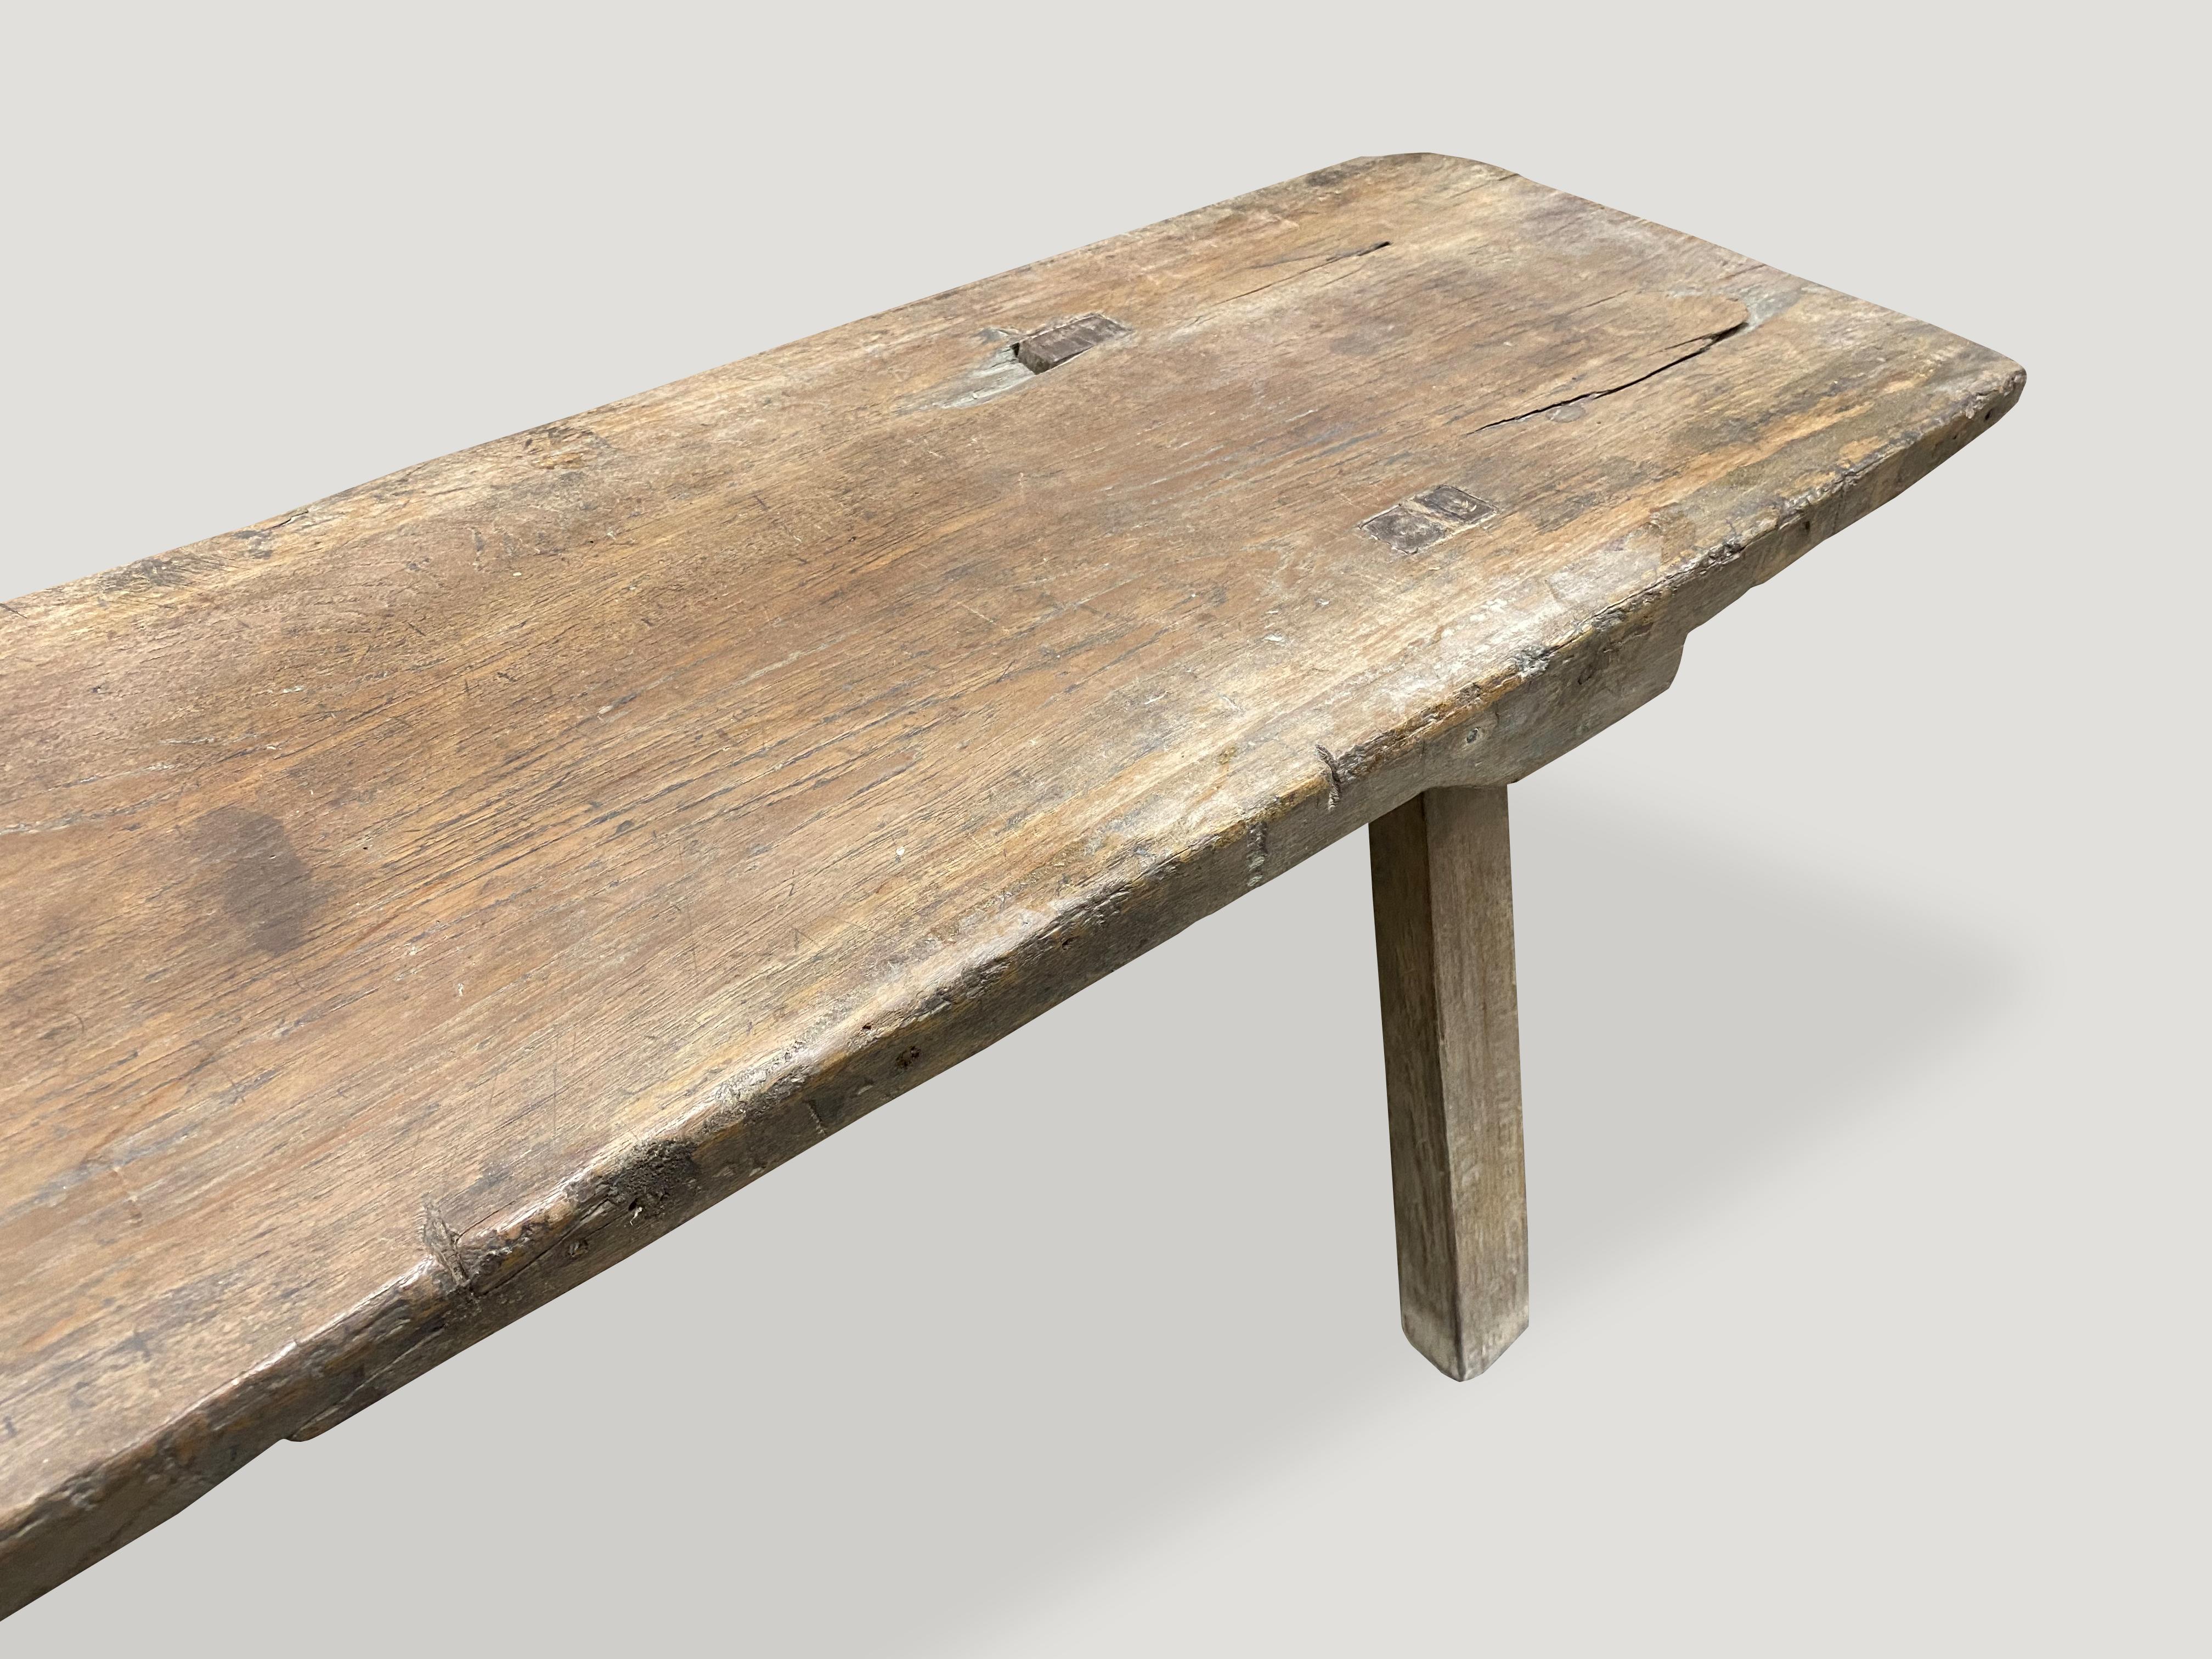 Antique bench made from a single reclaimed panel with beautiful patina. Perfection is imperfection.

This bench or coffee table was sourced in the spirit of wabi-sabi, a Japanese philosophy that beauty can be found in imperfection and